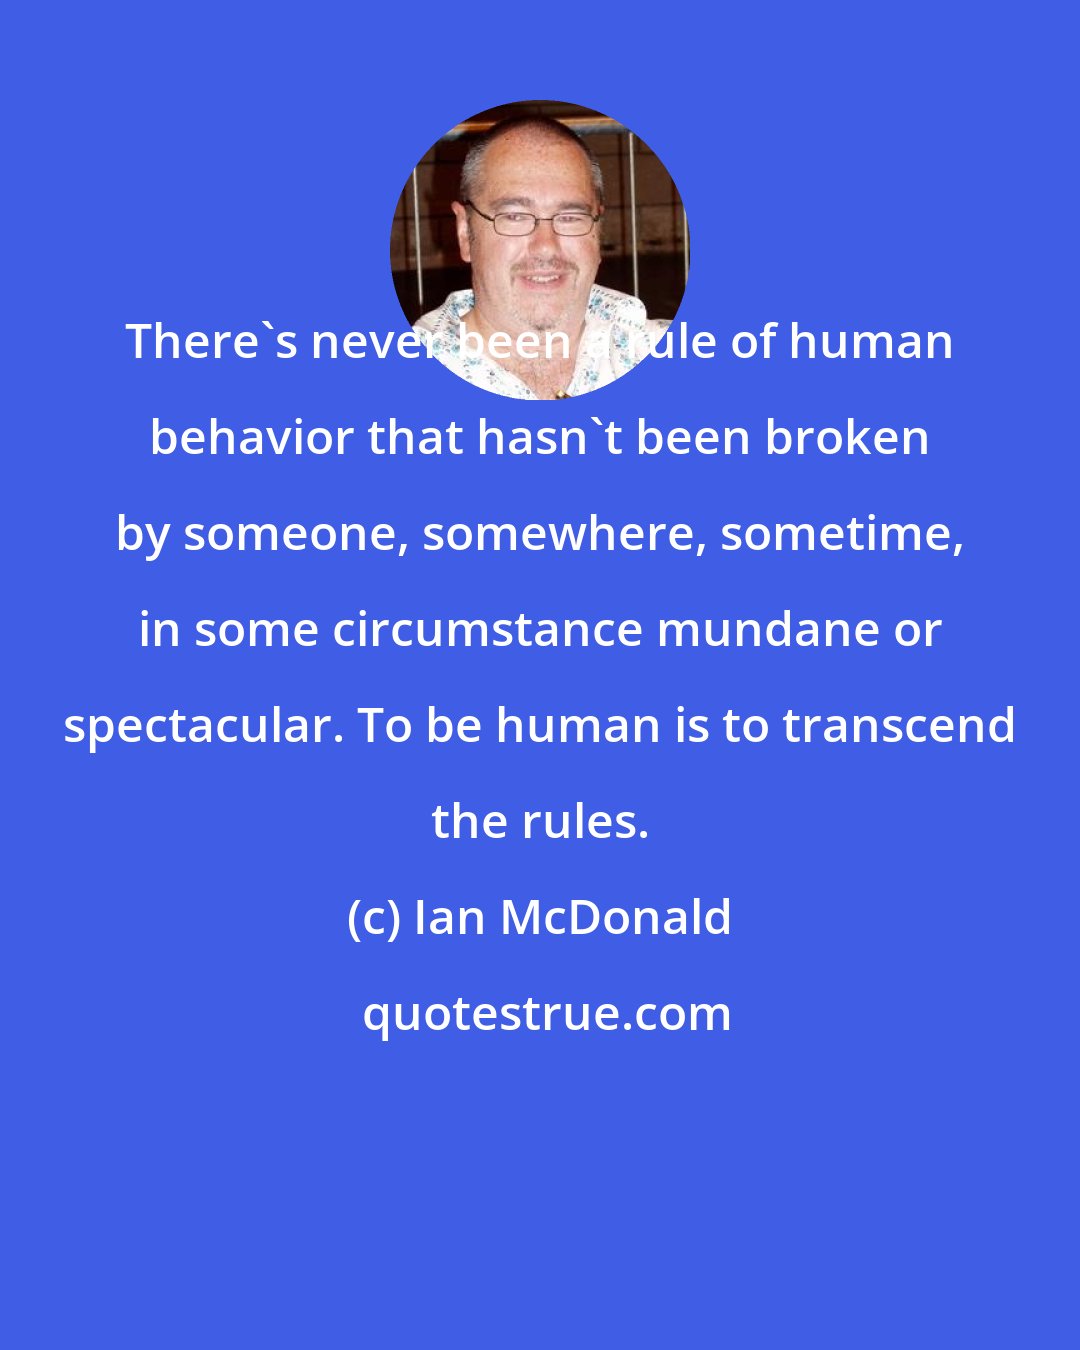 Ian McDonald: There's never been a rule of human behavior that hasn't been broken by someone, somewhere, sometime, in some circumstance mundane or spectacular. To be human is to transcend the rules.